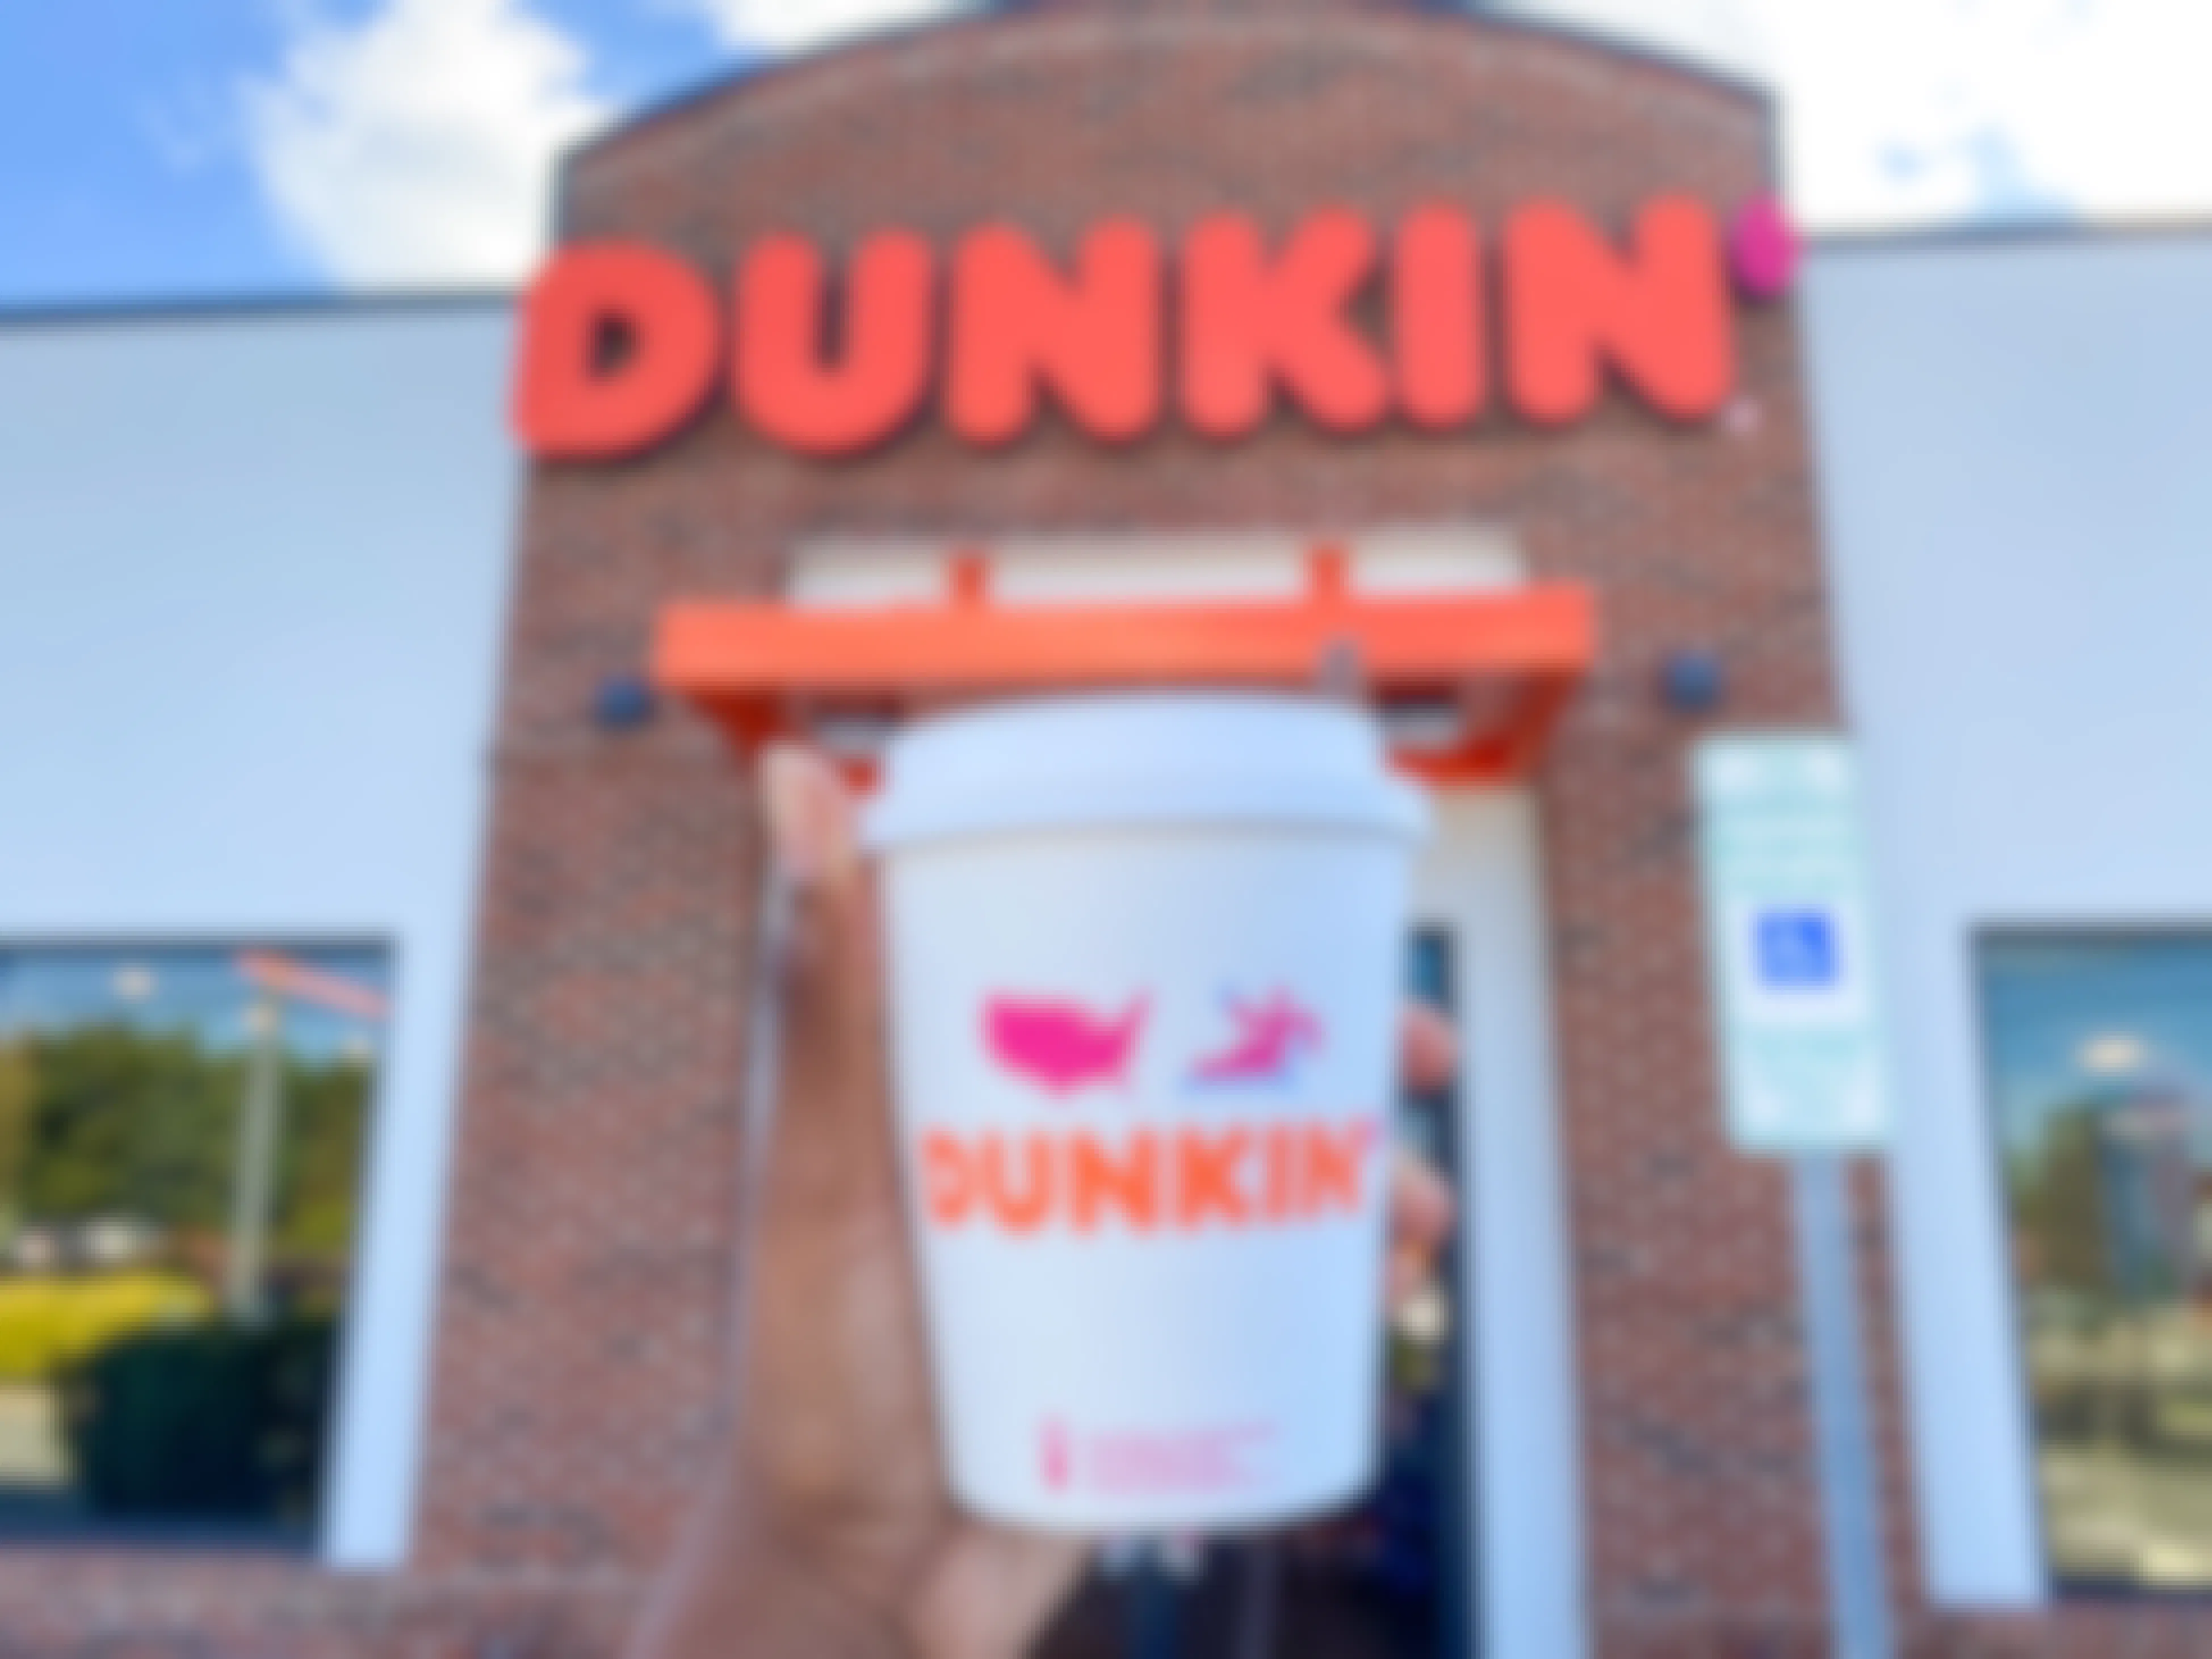 A person's hand holding up a Dunkin pumpkin spice latte in front of a Dunkin restaurant.